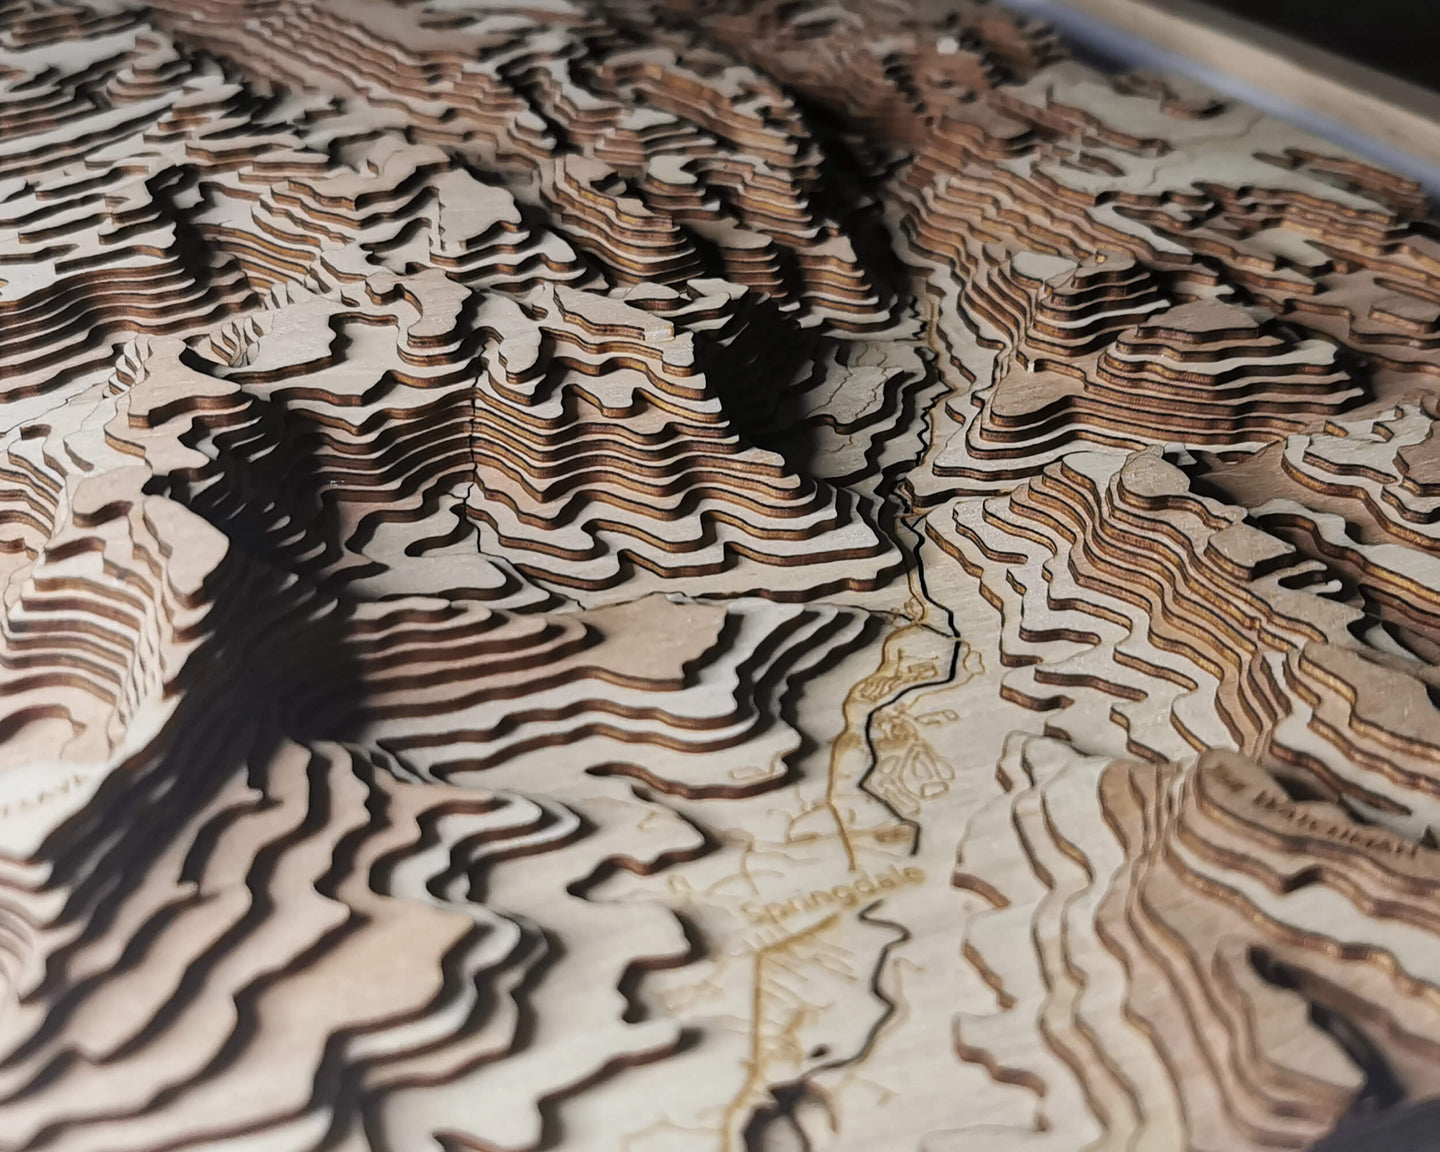 Wooden topographic map art of Zion national park in Utah USA